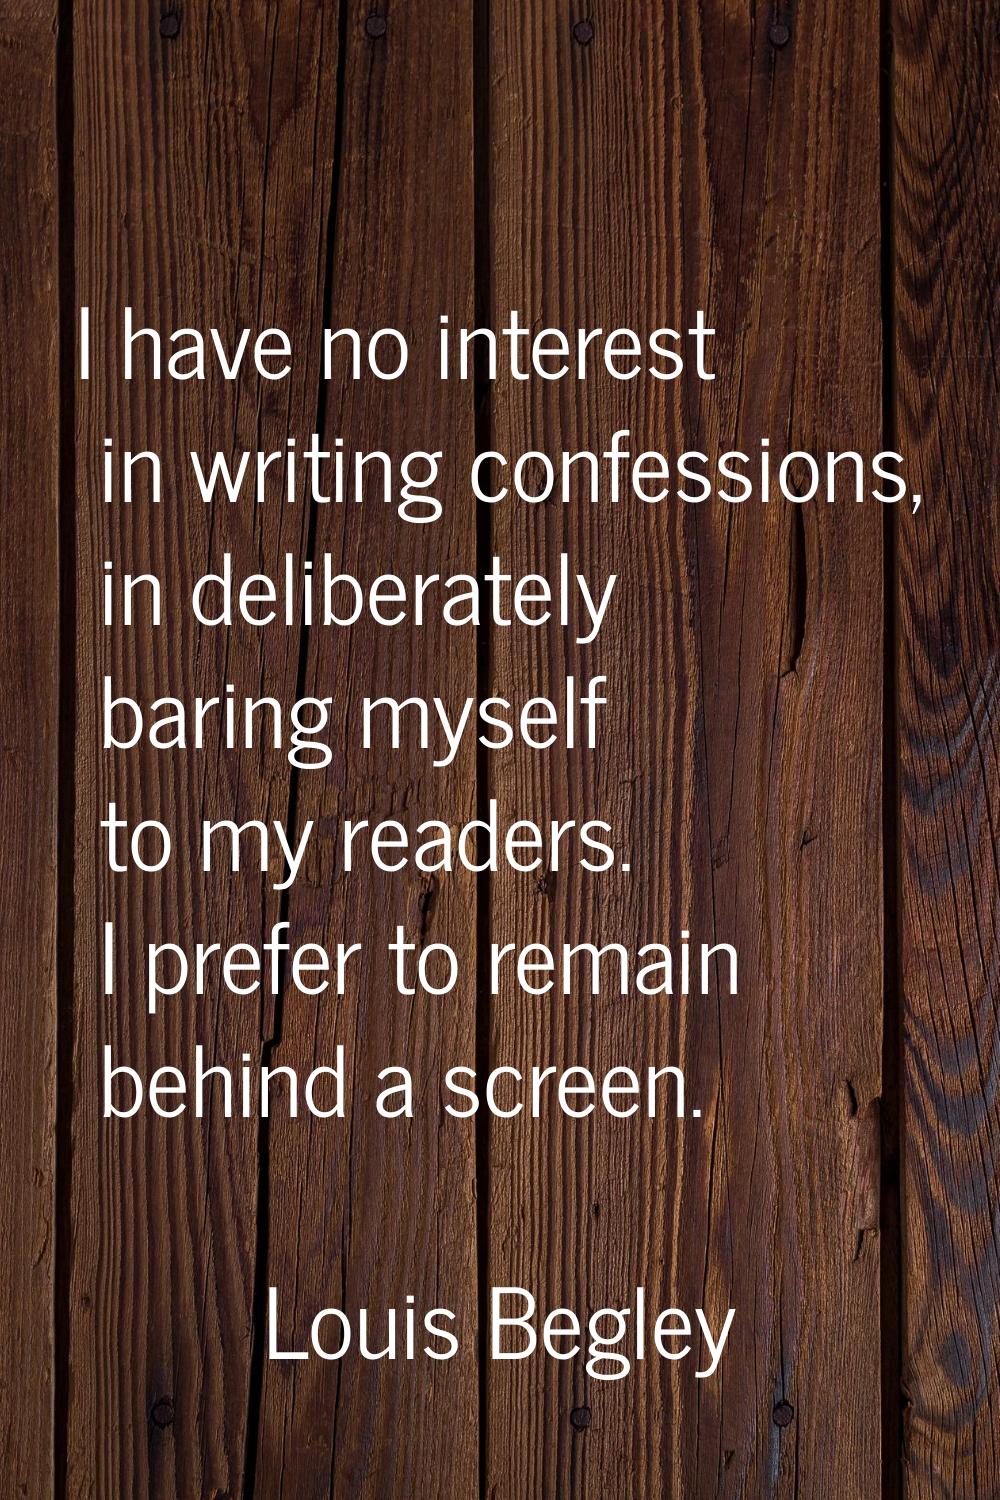 I have no interest in writing confessions, in deliberately baring myself to my readers. I prefer to